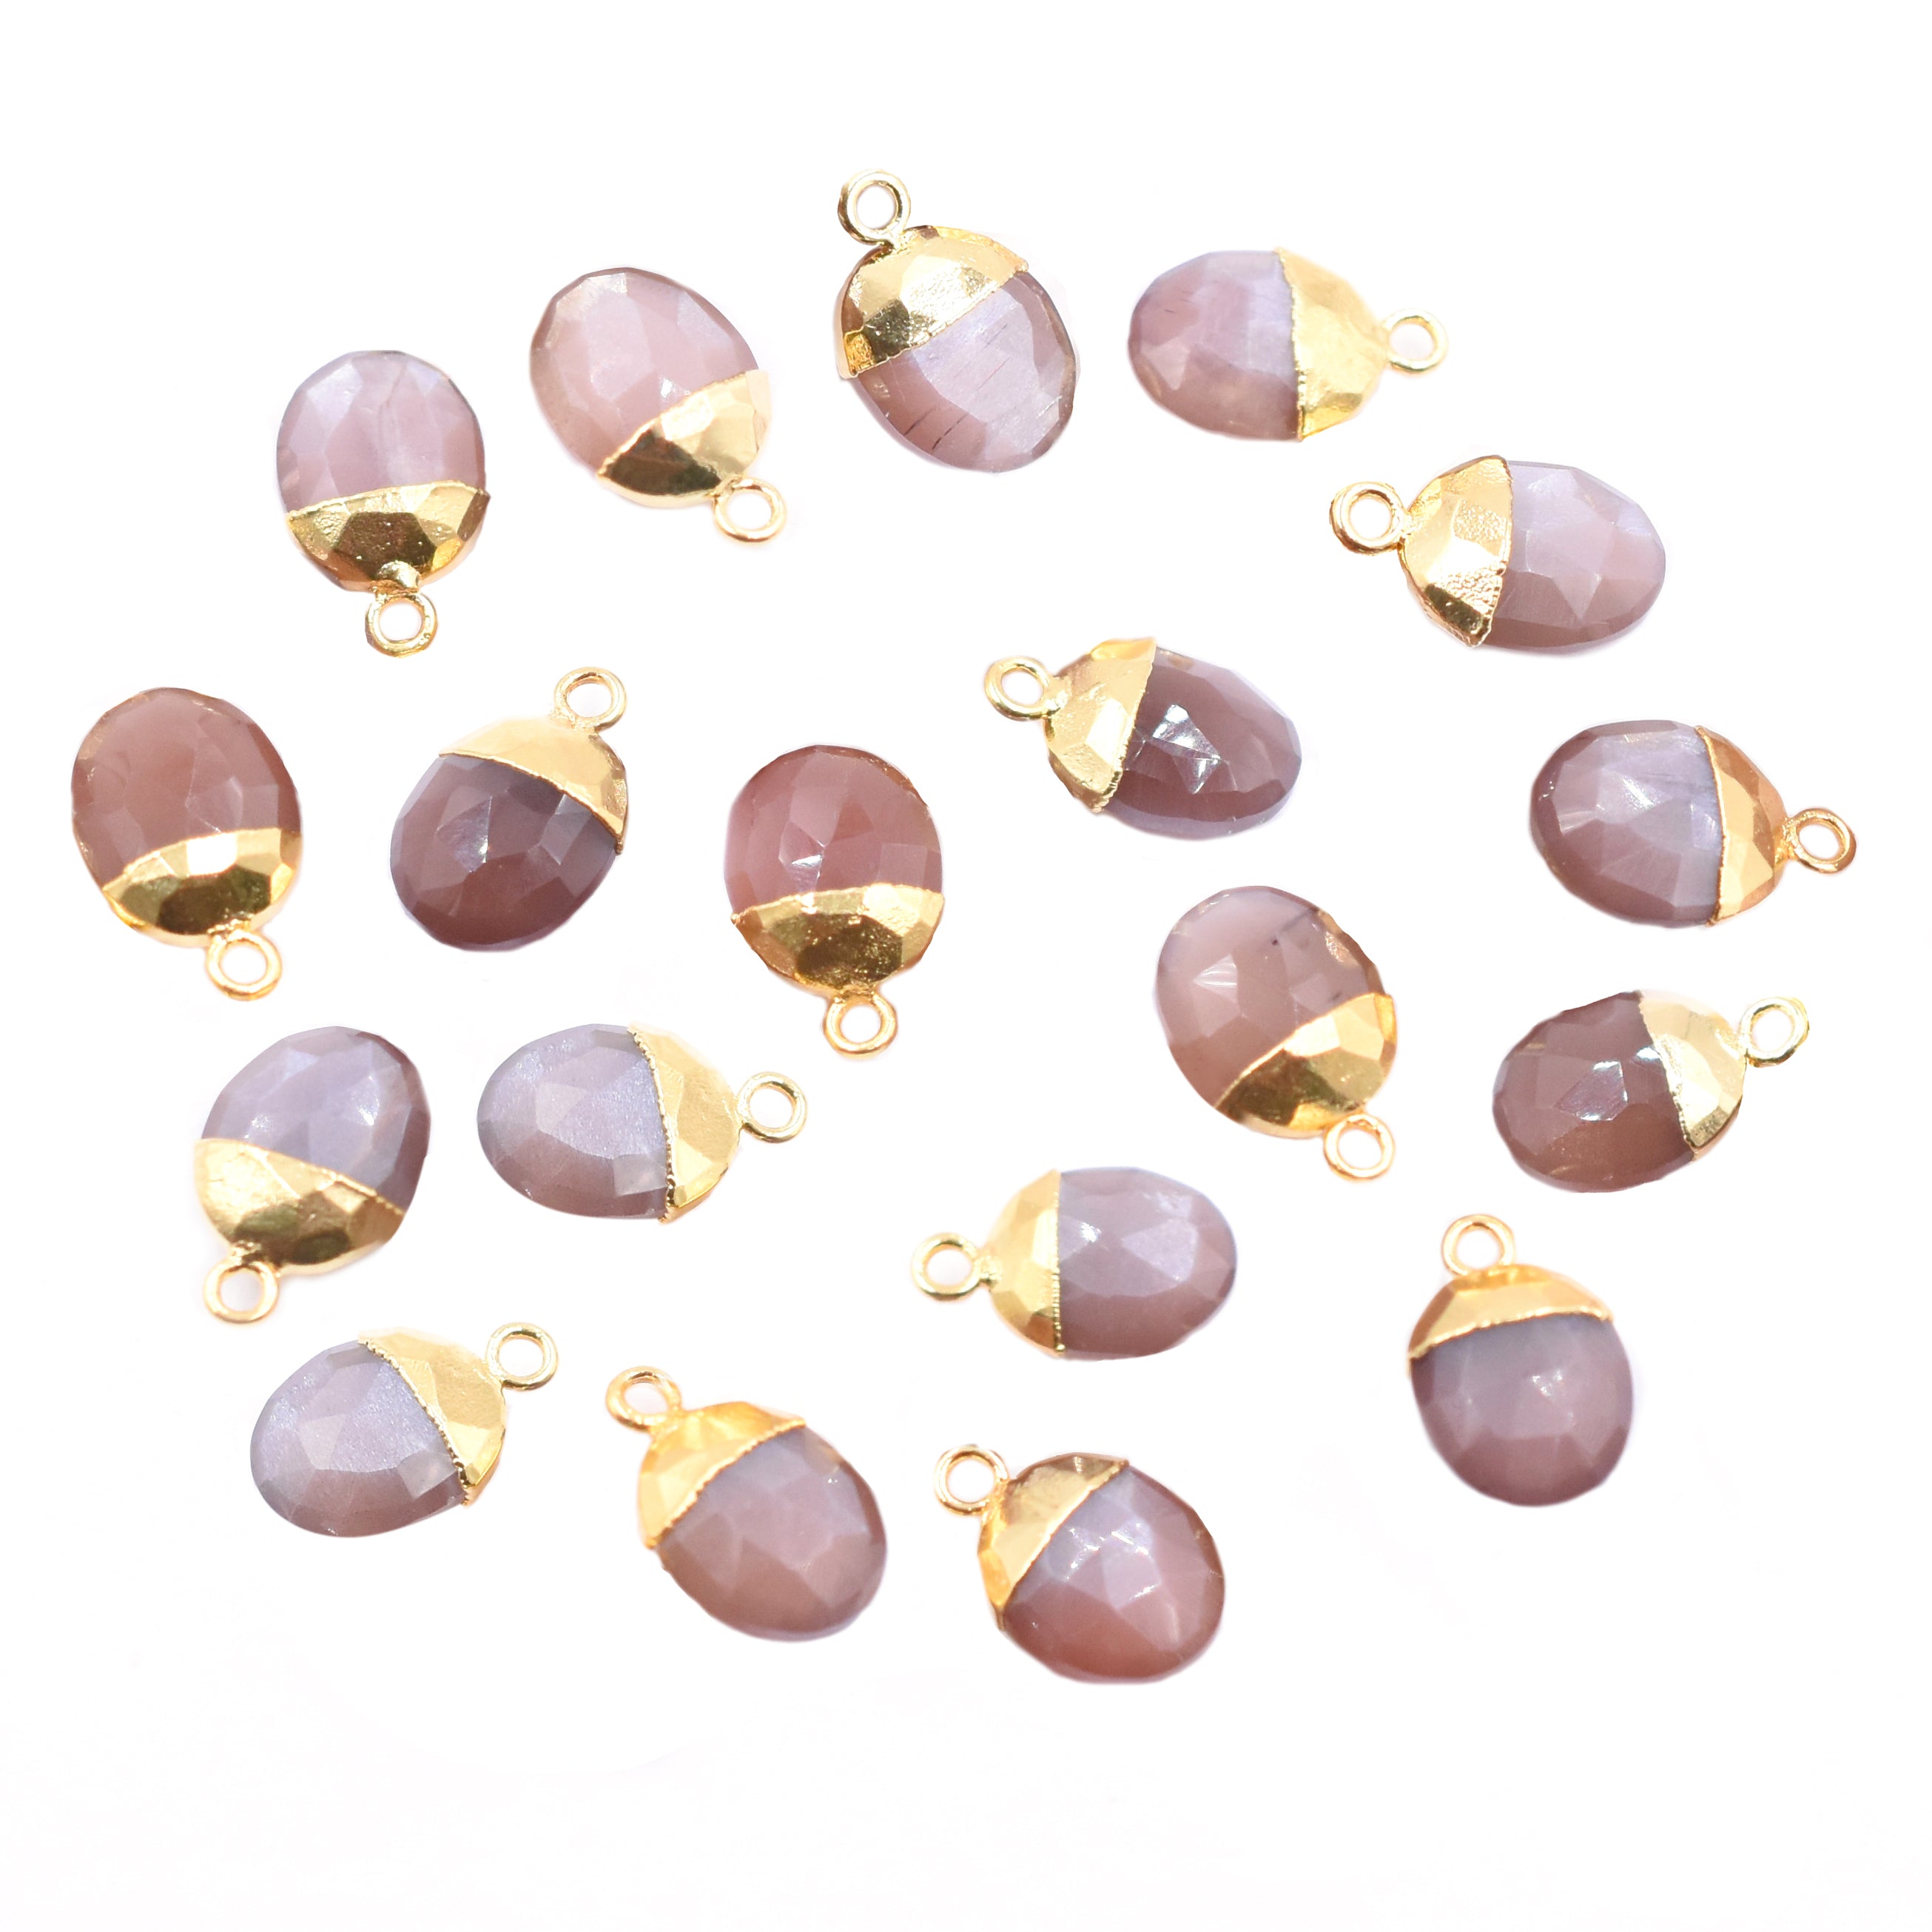 Brown Chocolate Moonstone 10X8 MM Oval Shape Gold Electroplated Pendant (Set Of 2 Pcs)